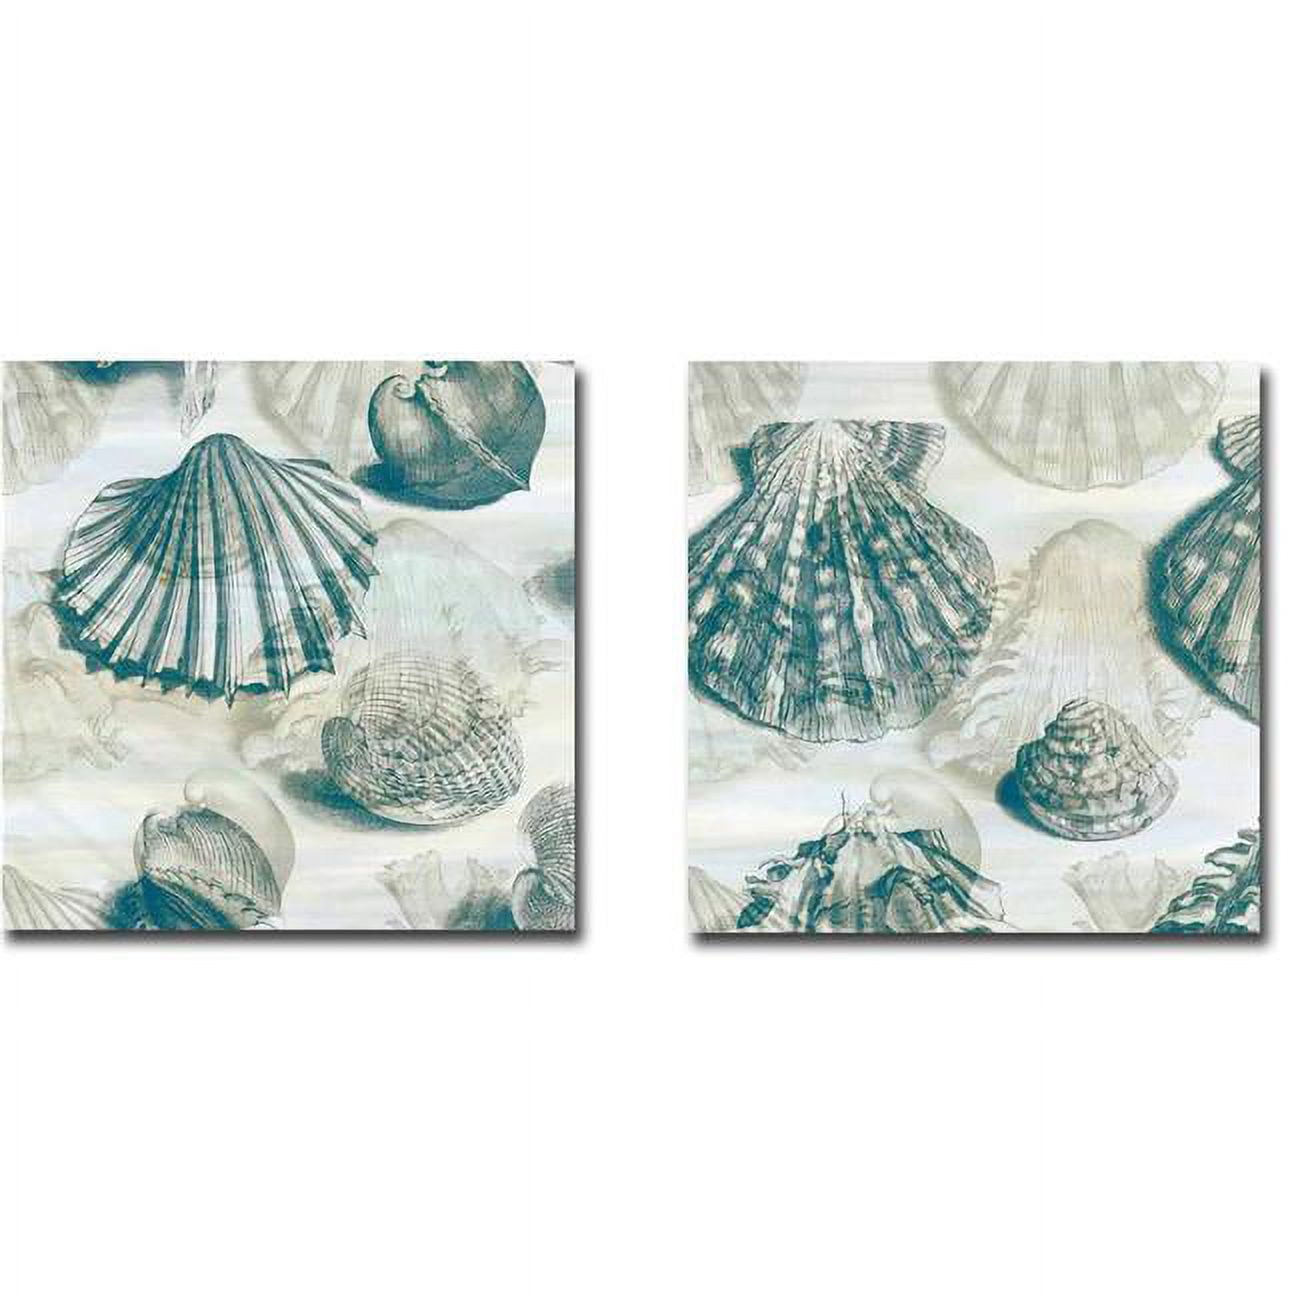 1212w743eg Shell Engraving 1 & 2 By John Butler 2-piece Gallery-wrapped Canvas Giclee Set - 12 X 12 X 1.5 In.